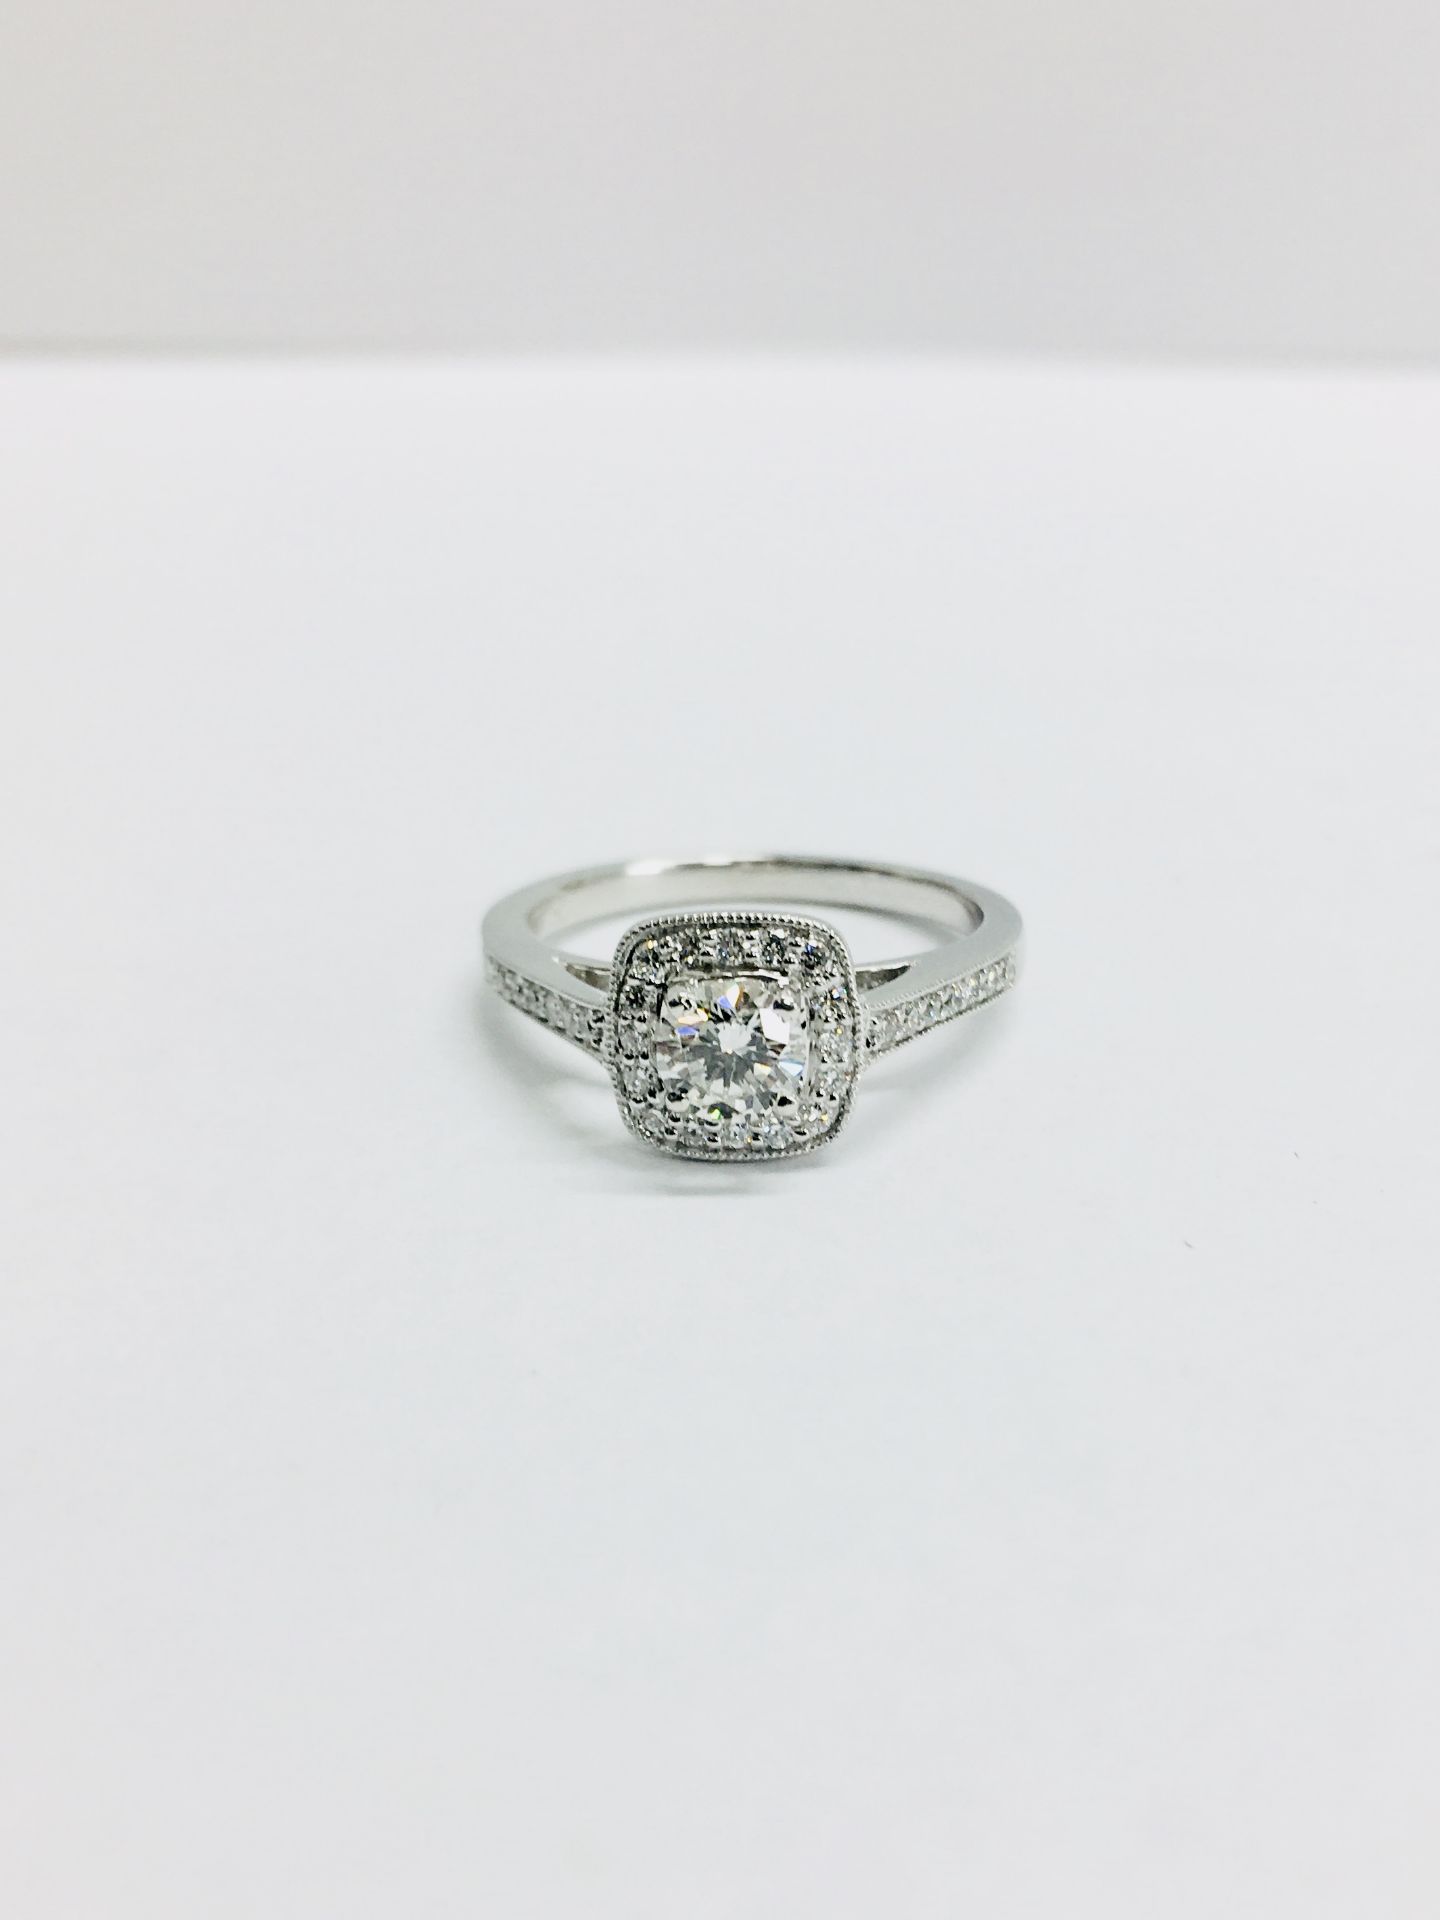 9ct white gold Diamond Halo solitaire ring,0.30ct centre h colour is grade,0.18ct h colour is